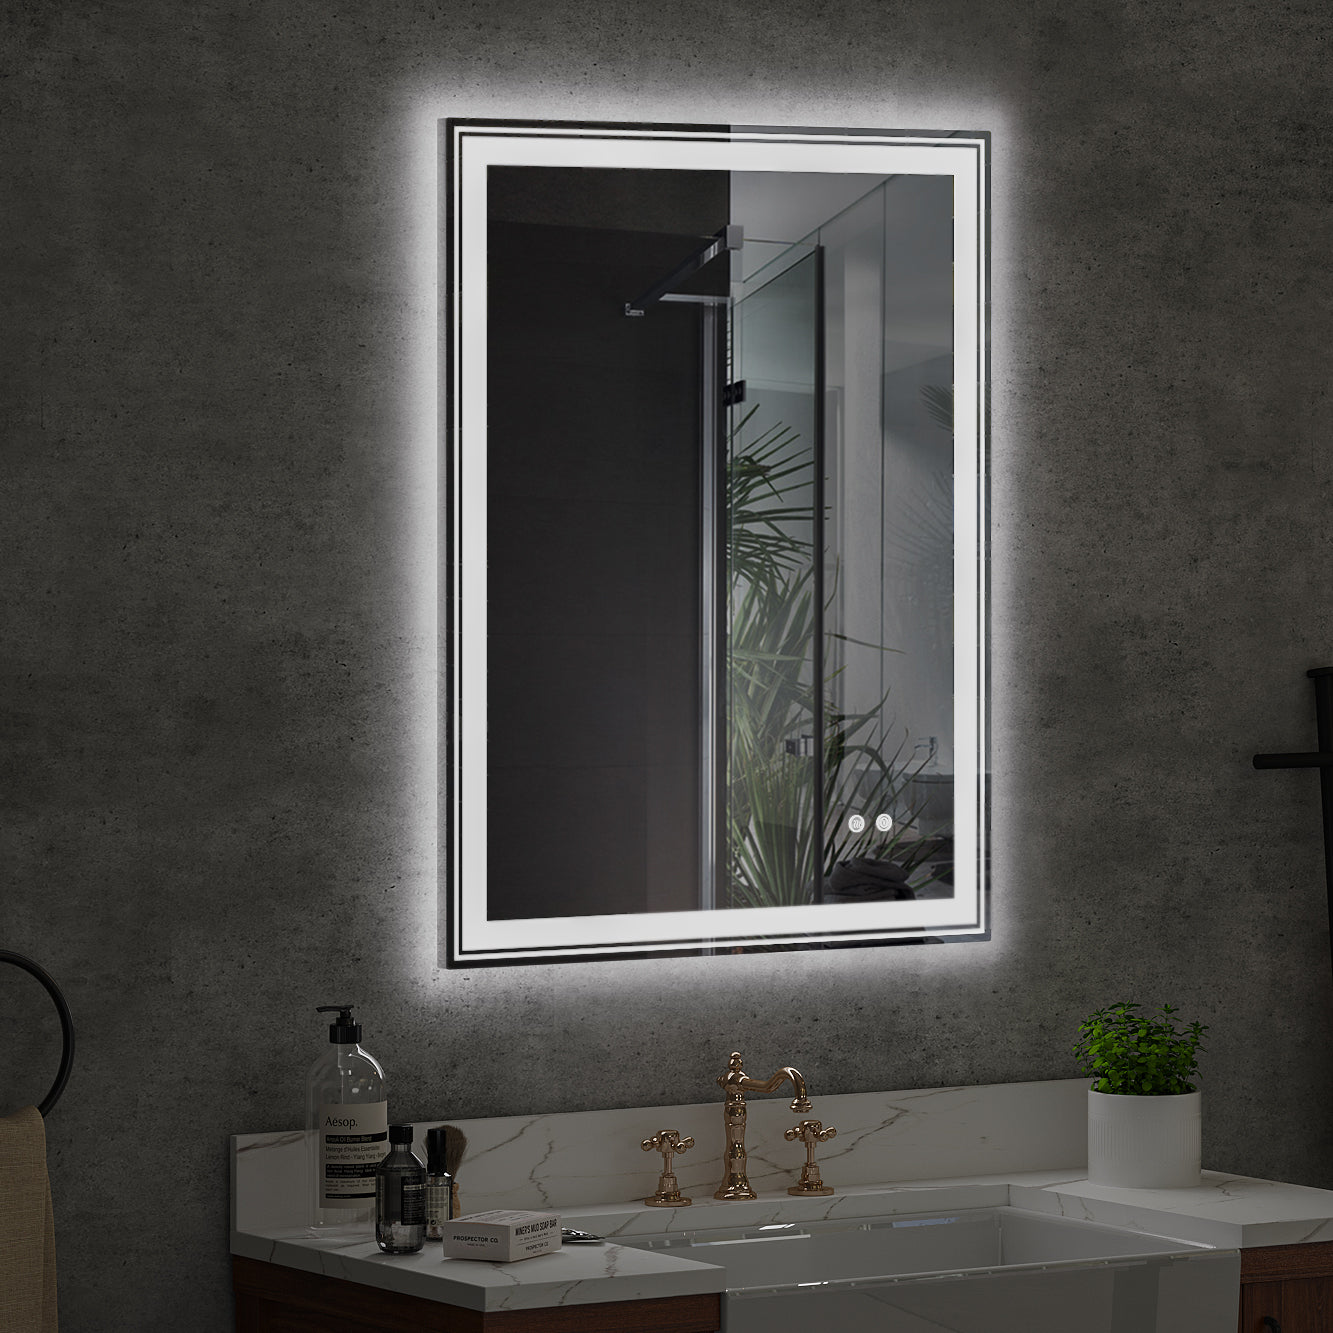 36"×28" inch LED Bathroom Vanity Mirror with Anti-Fog and Adjustable Brightness front and back light